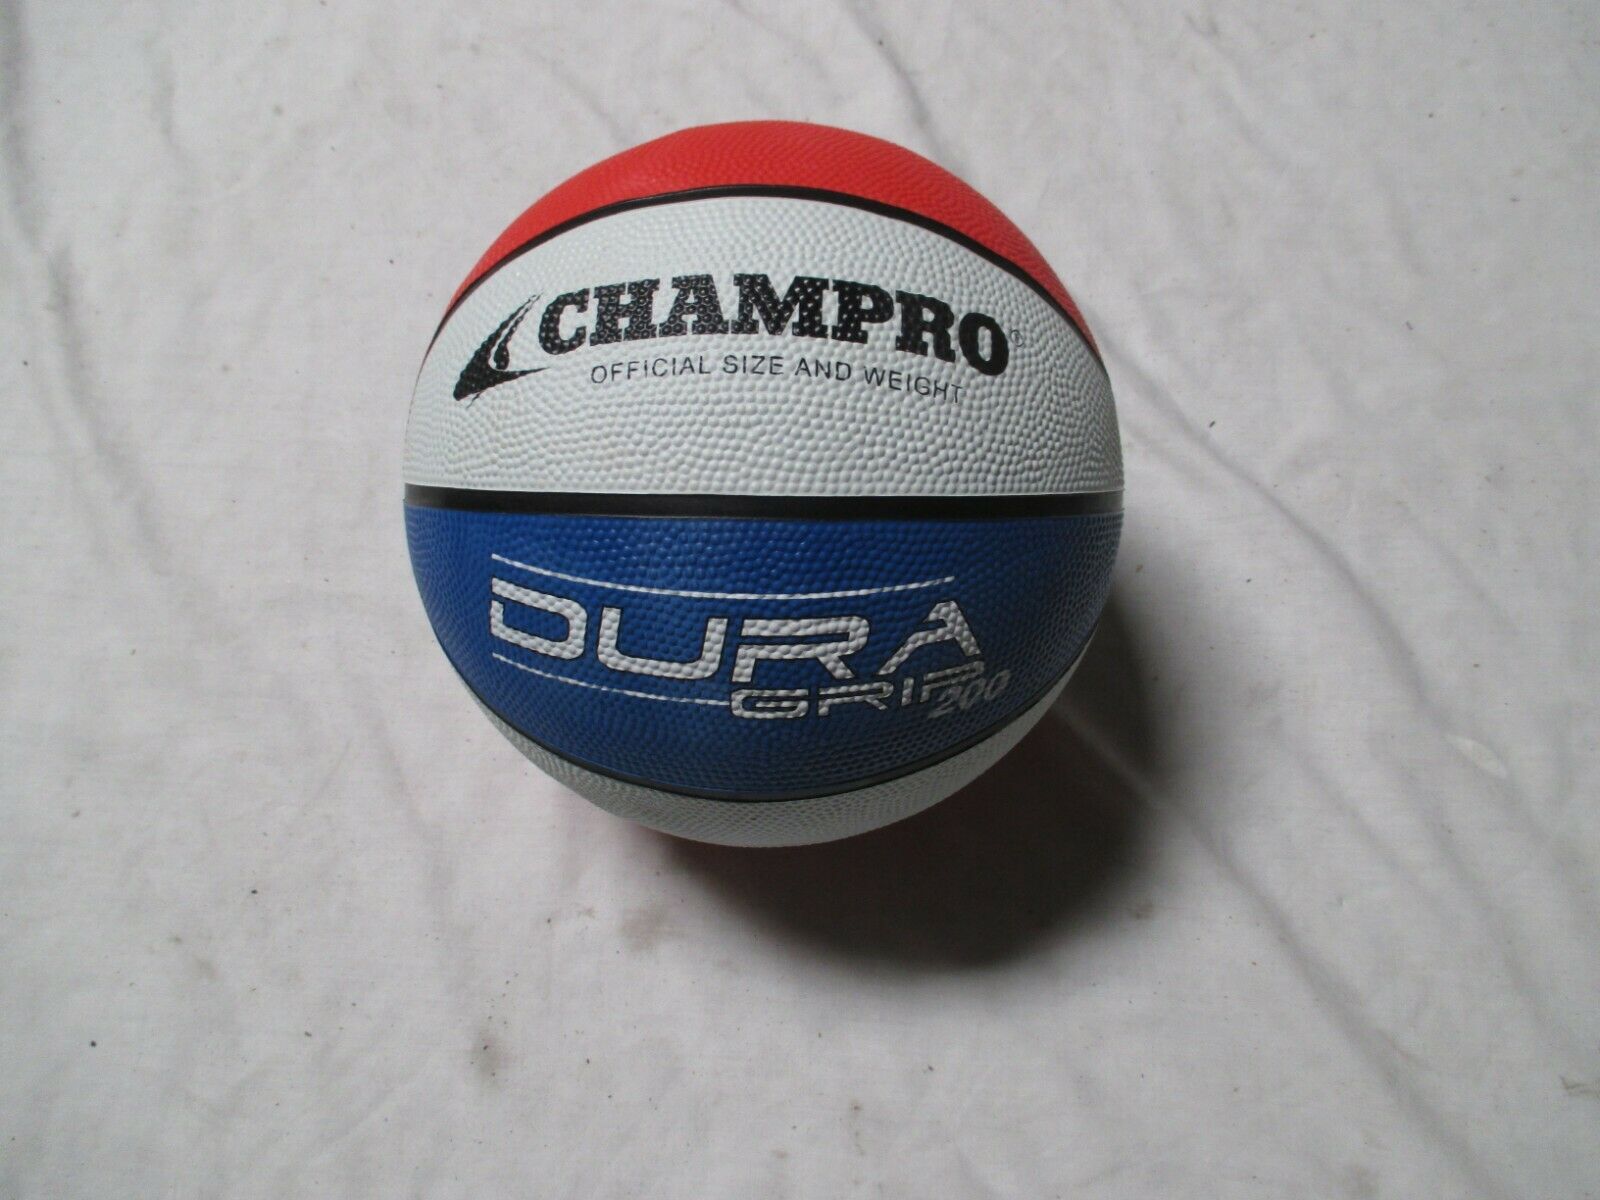 CHAMPRO 200 RUBBER  BASKETBALL (29.5 OFFICIAL SIZE)